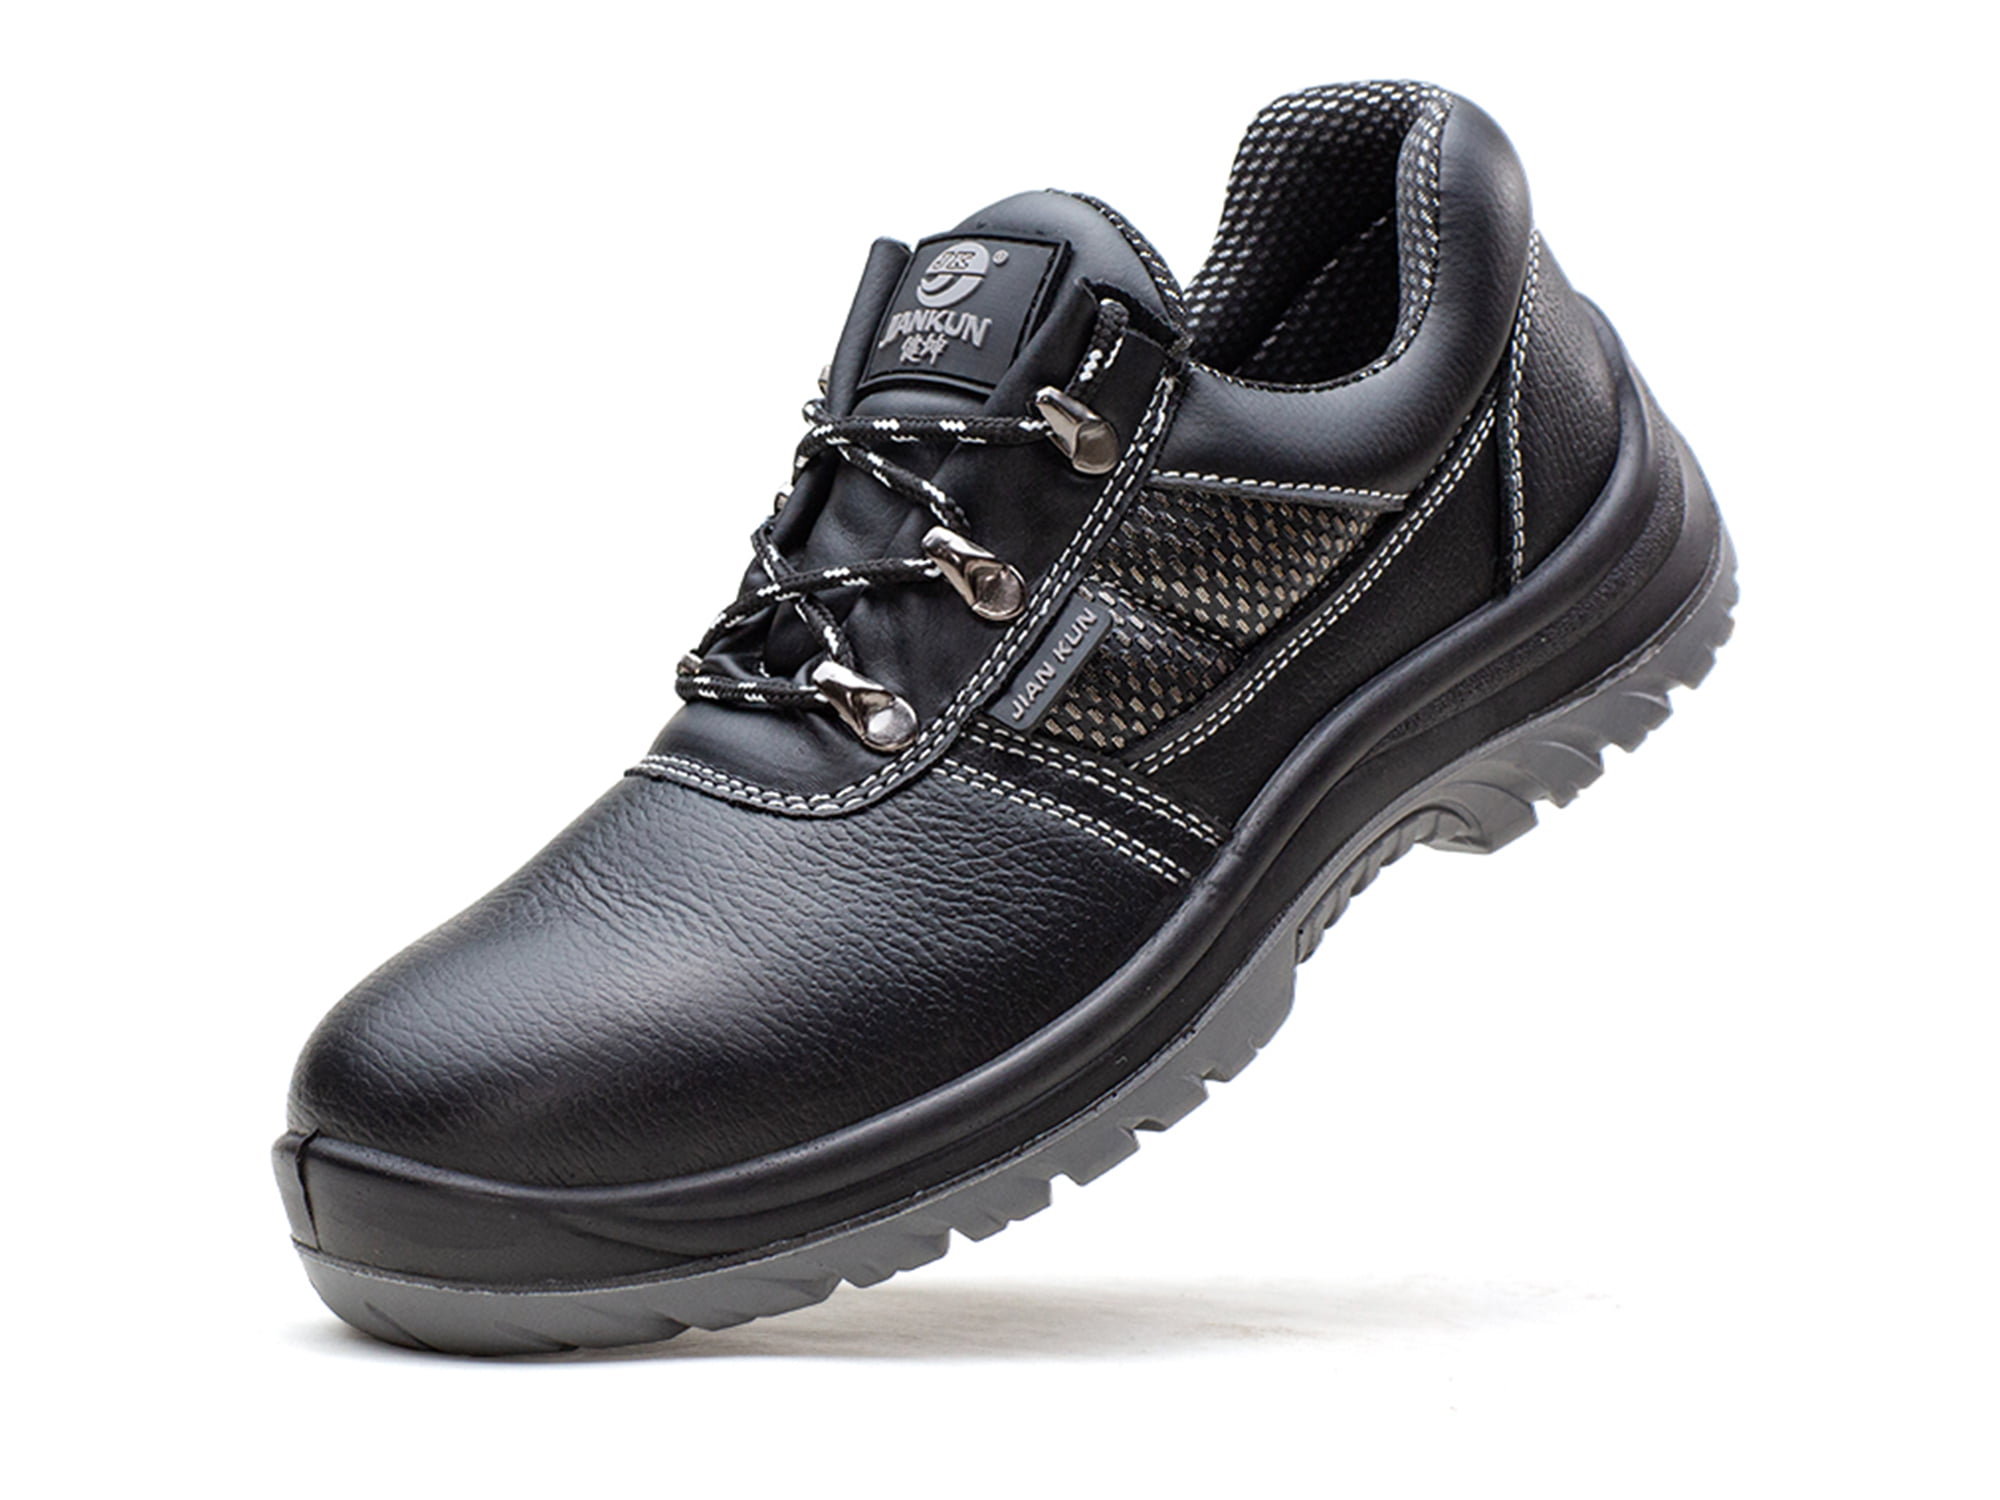 Details about   Men's Indestructible Tactical Steel Toe Sports Mesh Work Boots Mid-Ankle Boots 